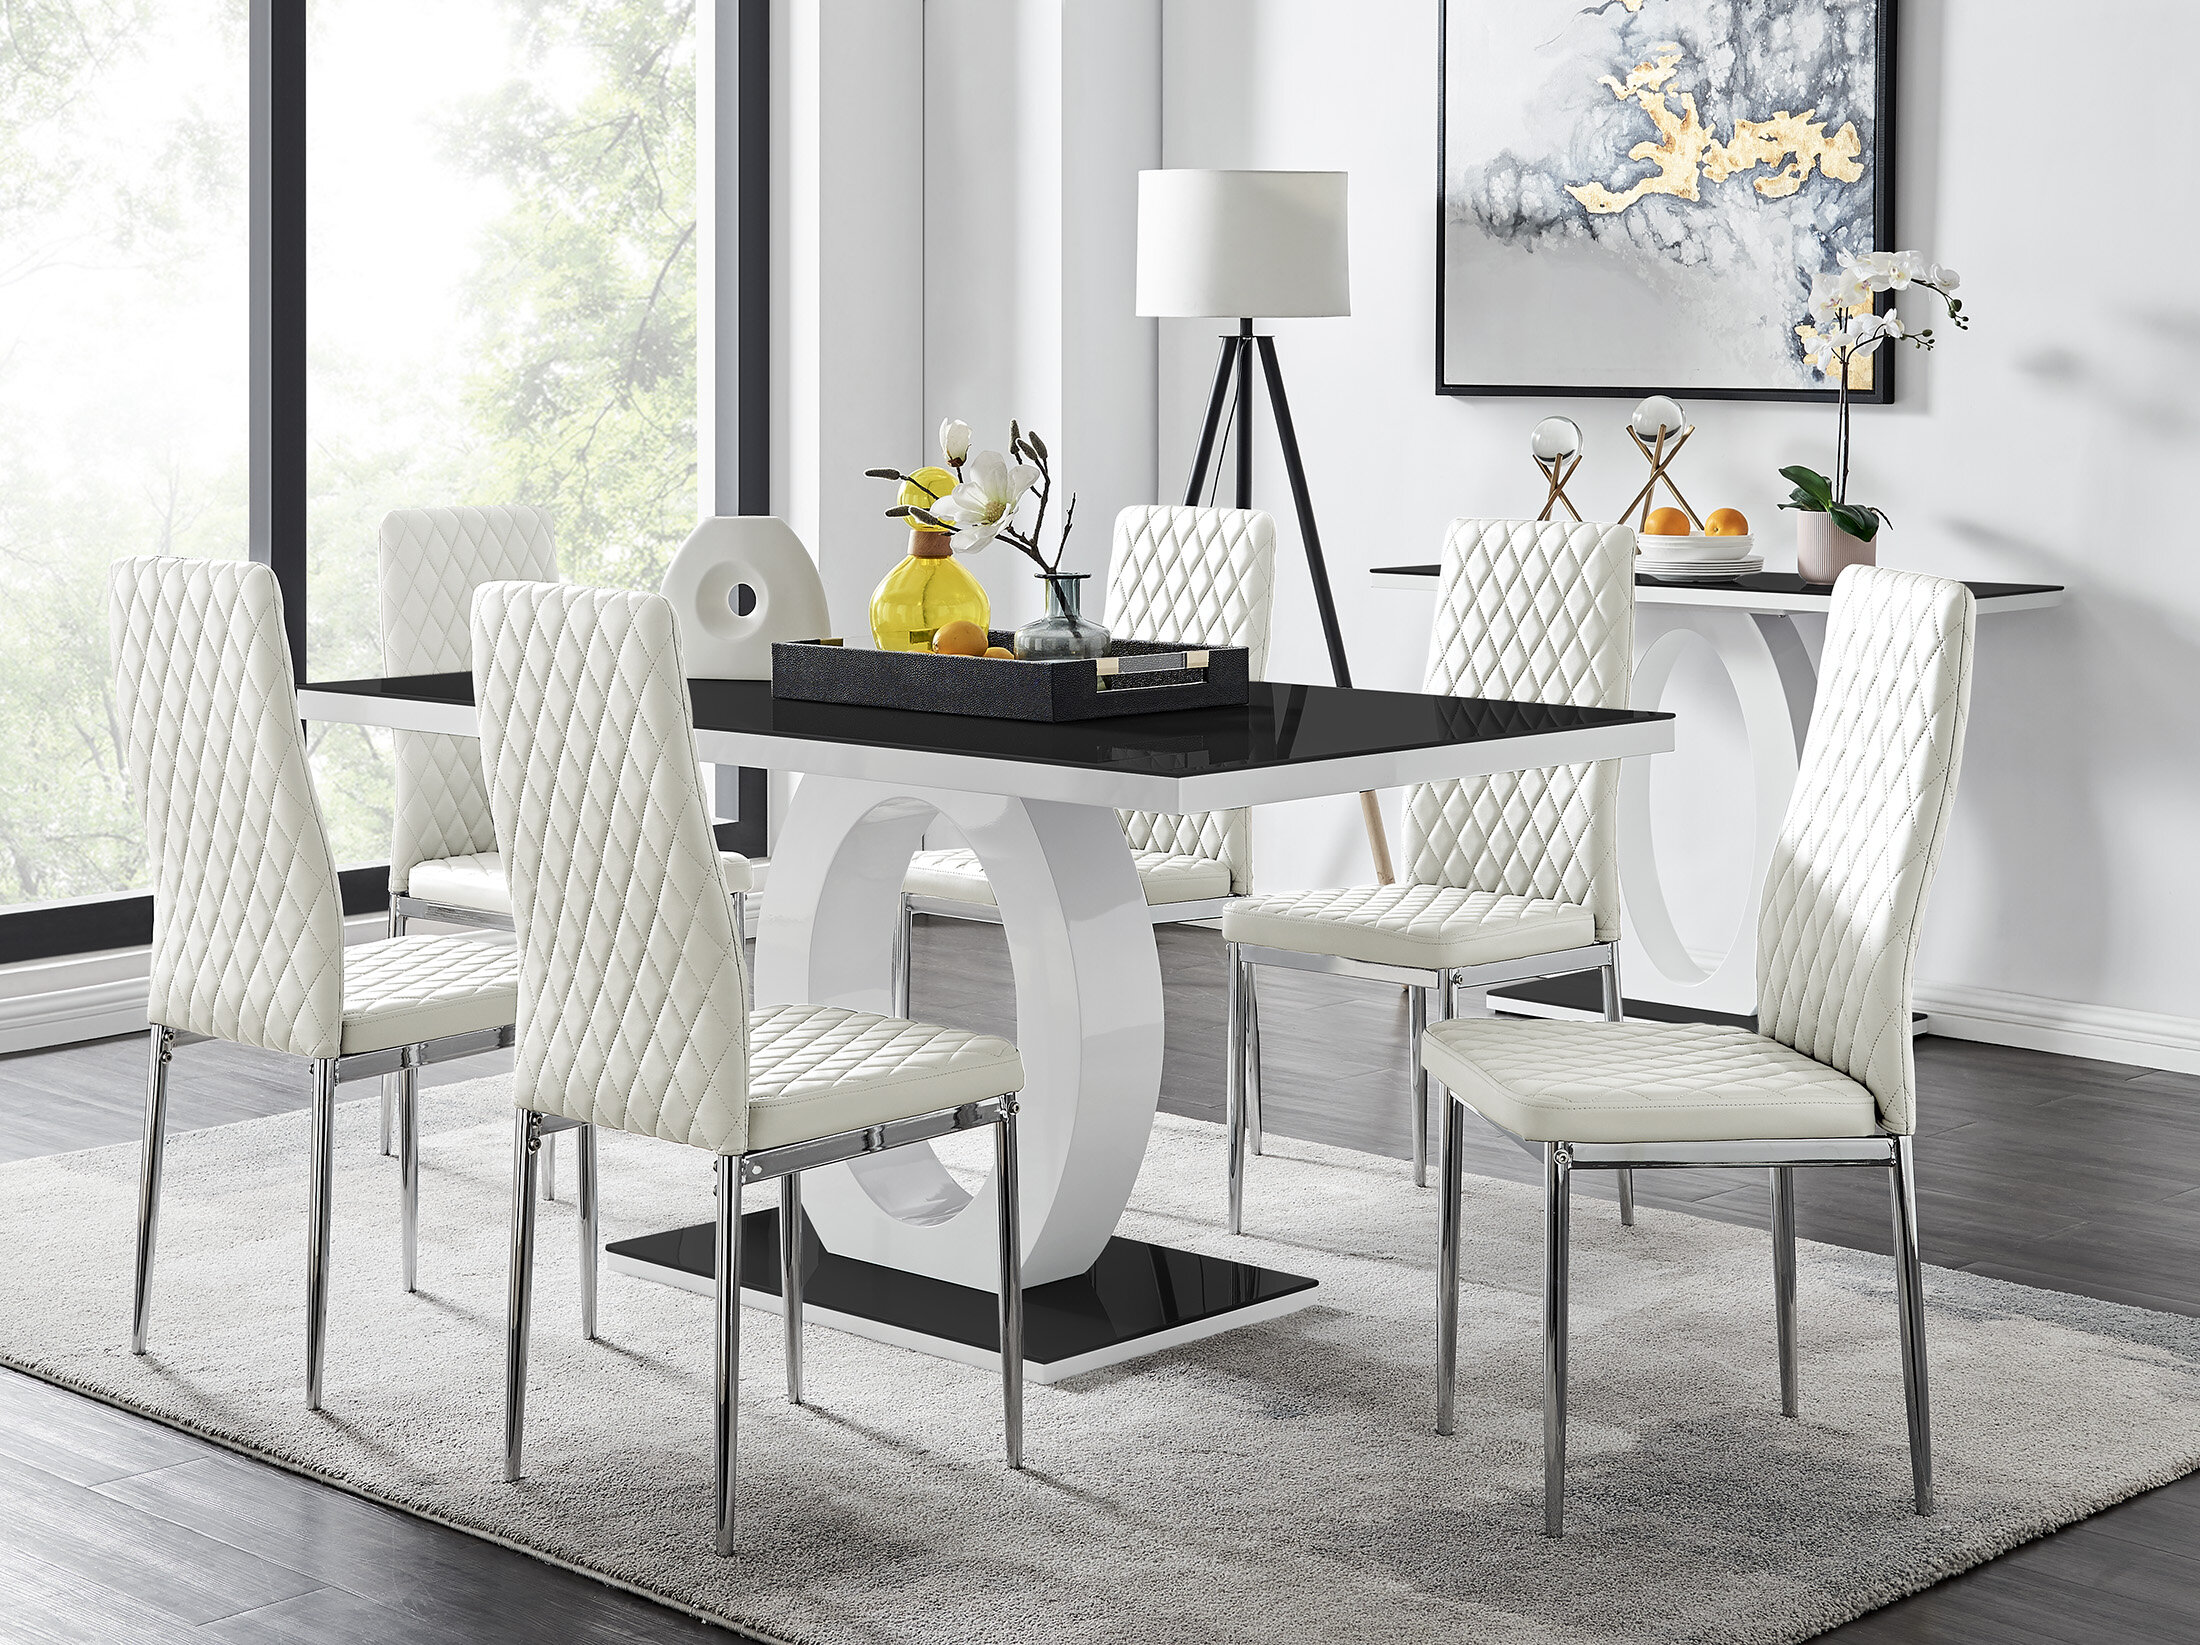 Black and White Dining Chairs - Contemporary - dining room - The